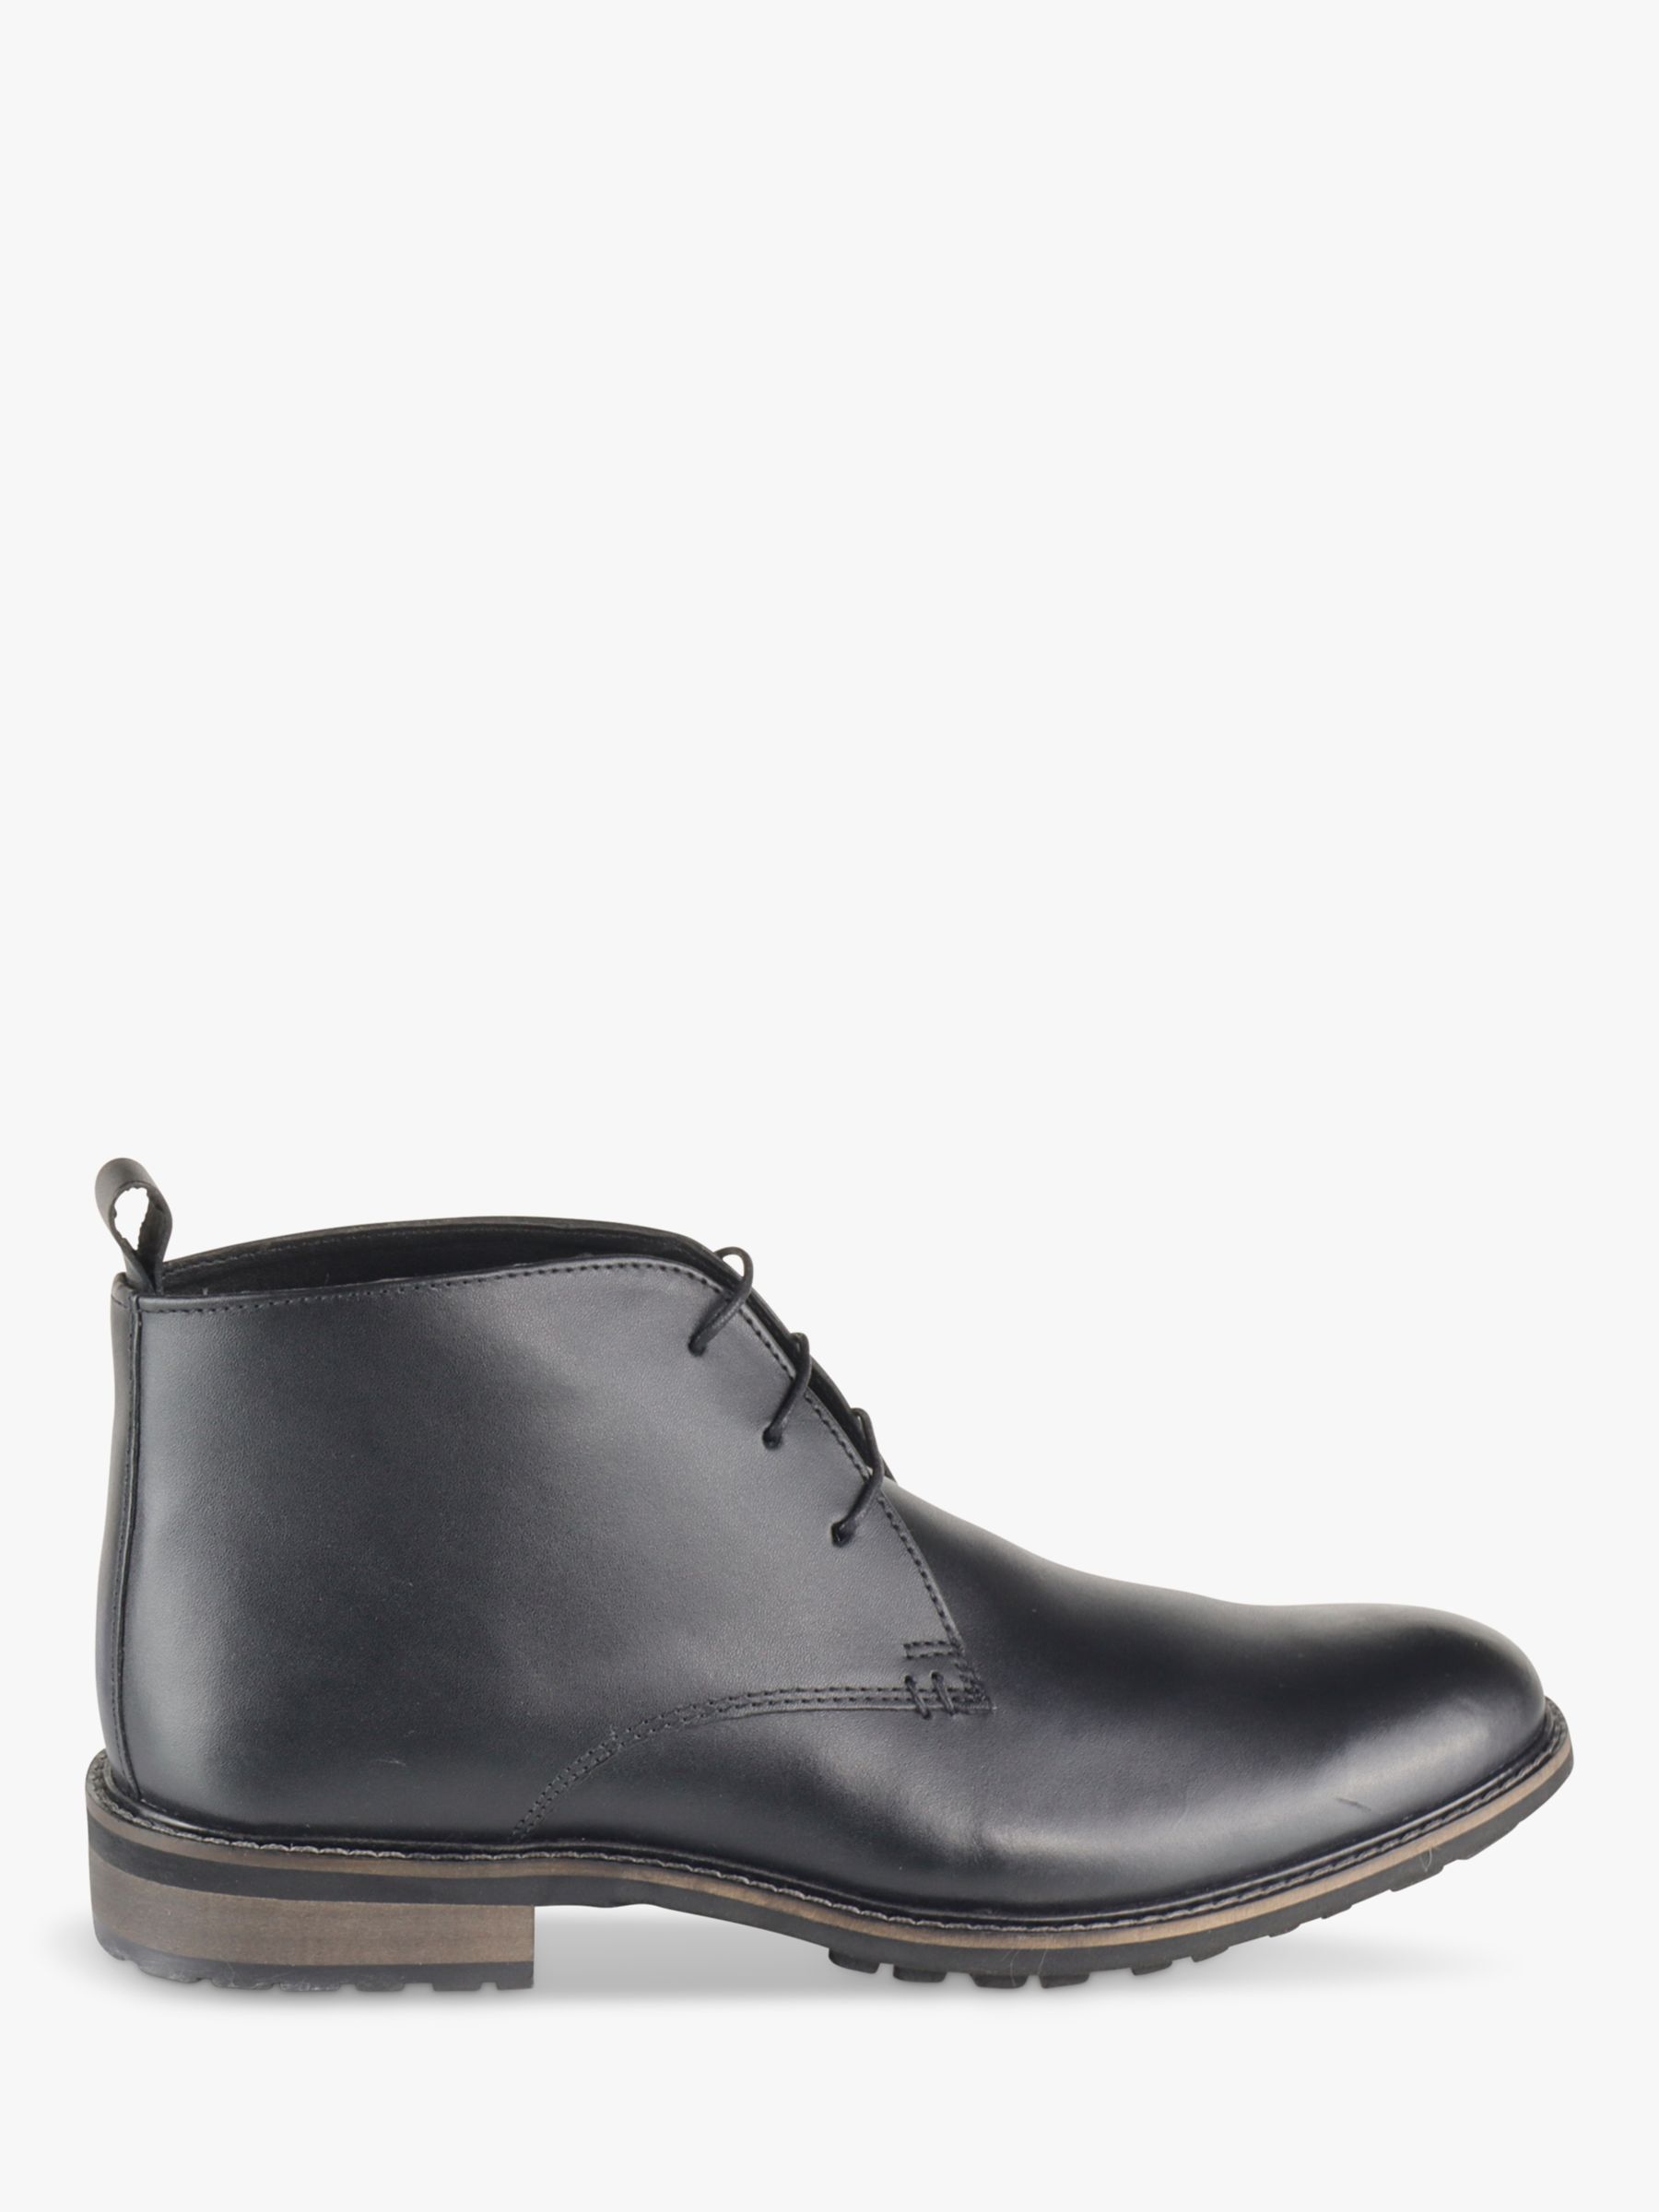 Silver Street London Ludgate Leather Chukka Boots, Black, 7